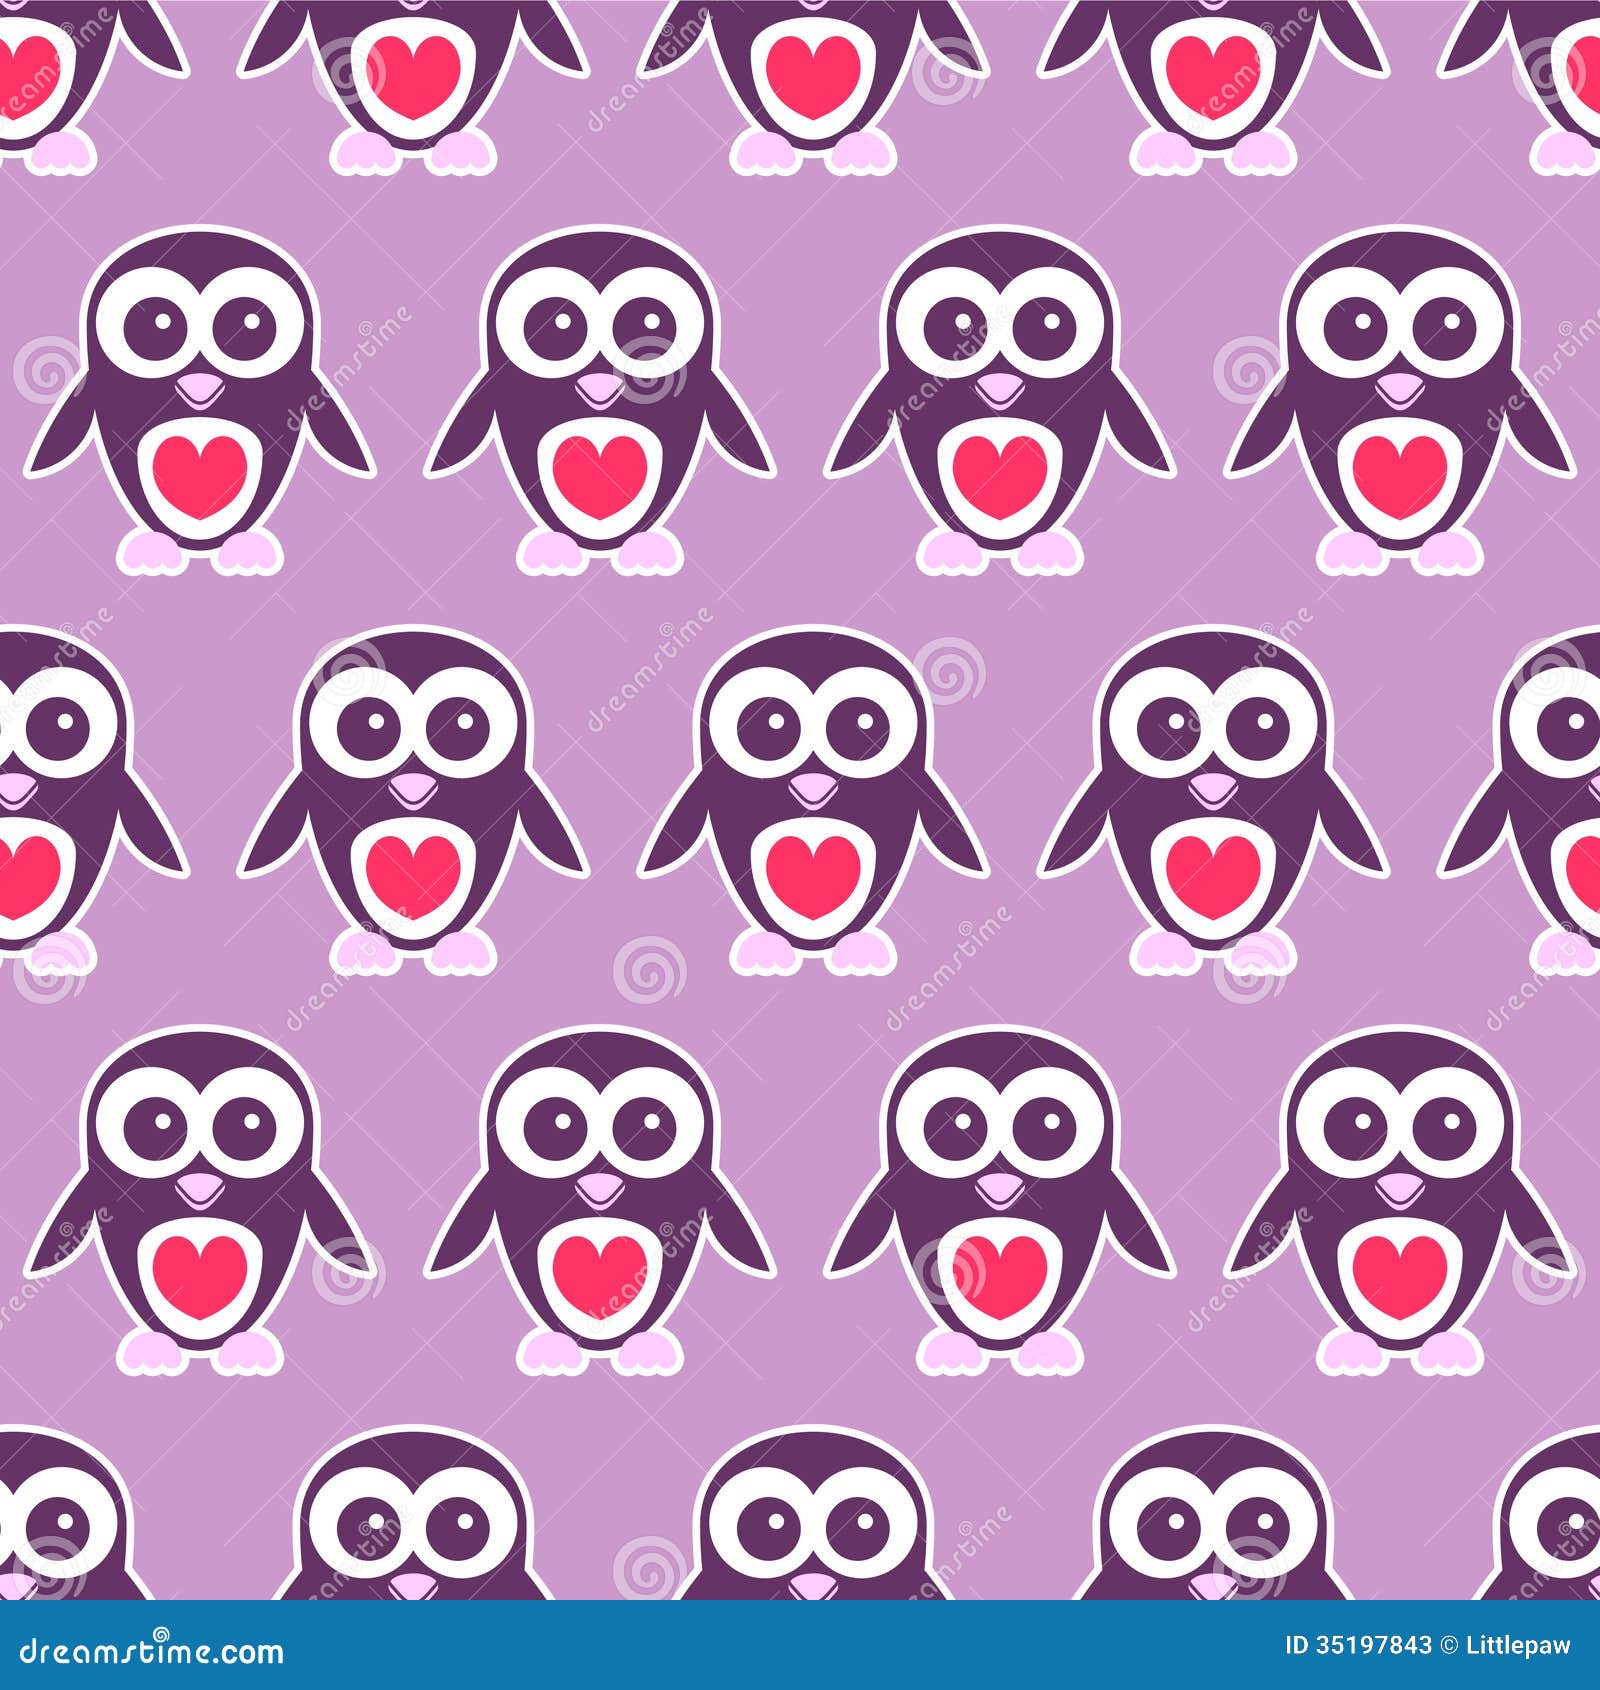 Cute Seamless Pattern With Penguins Stock Vector - Illustration of ... Cute Winter Penguin Wallpaper